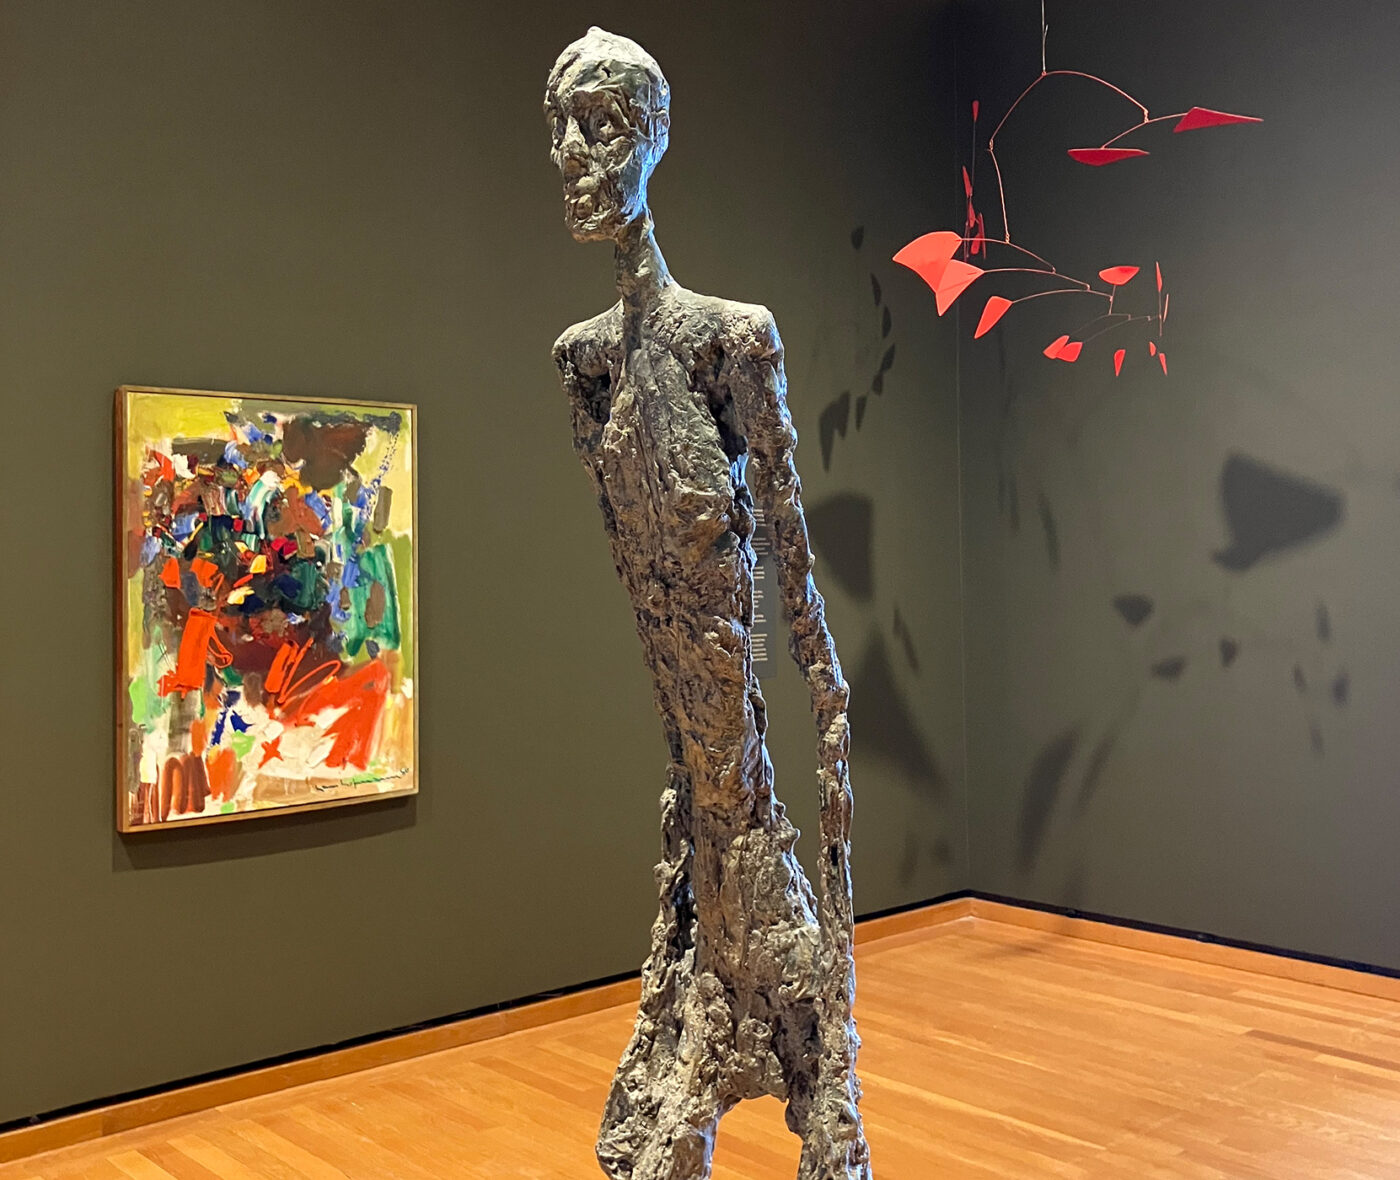 A colorful painting, thin figural sculpture, and red mobile in a museum gallery with dark green walls